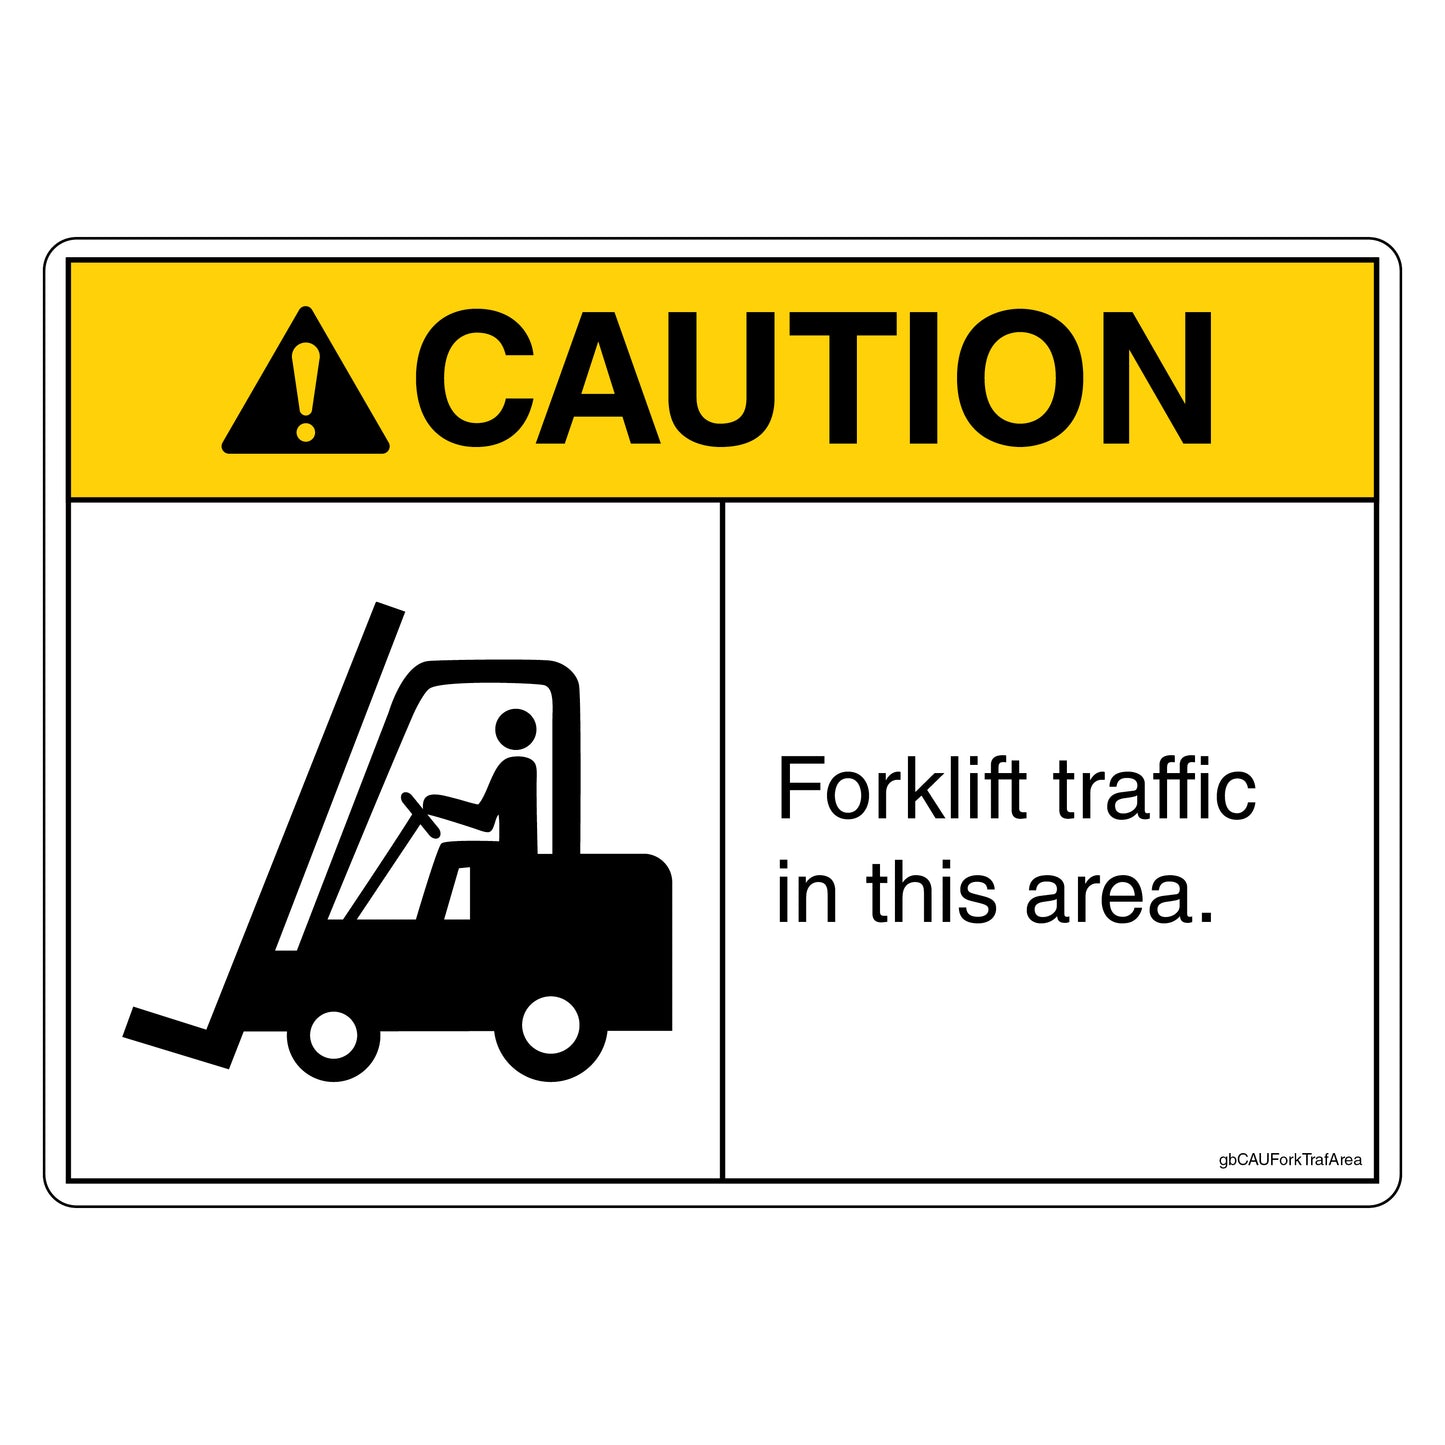 Caution Forklift Traffic in this Area Decal.